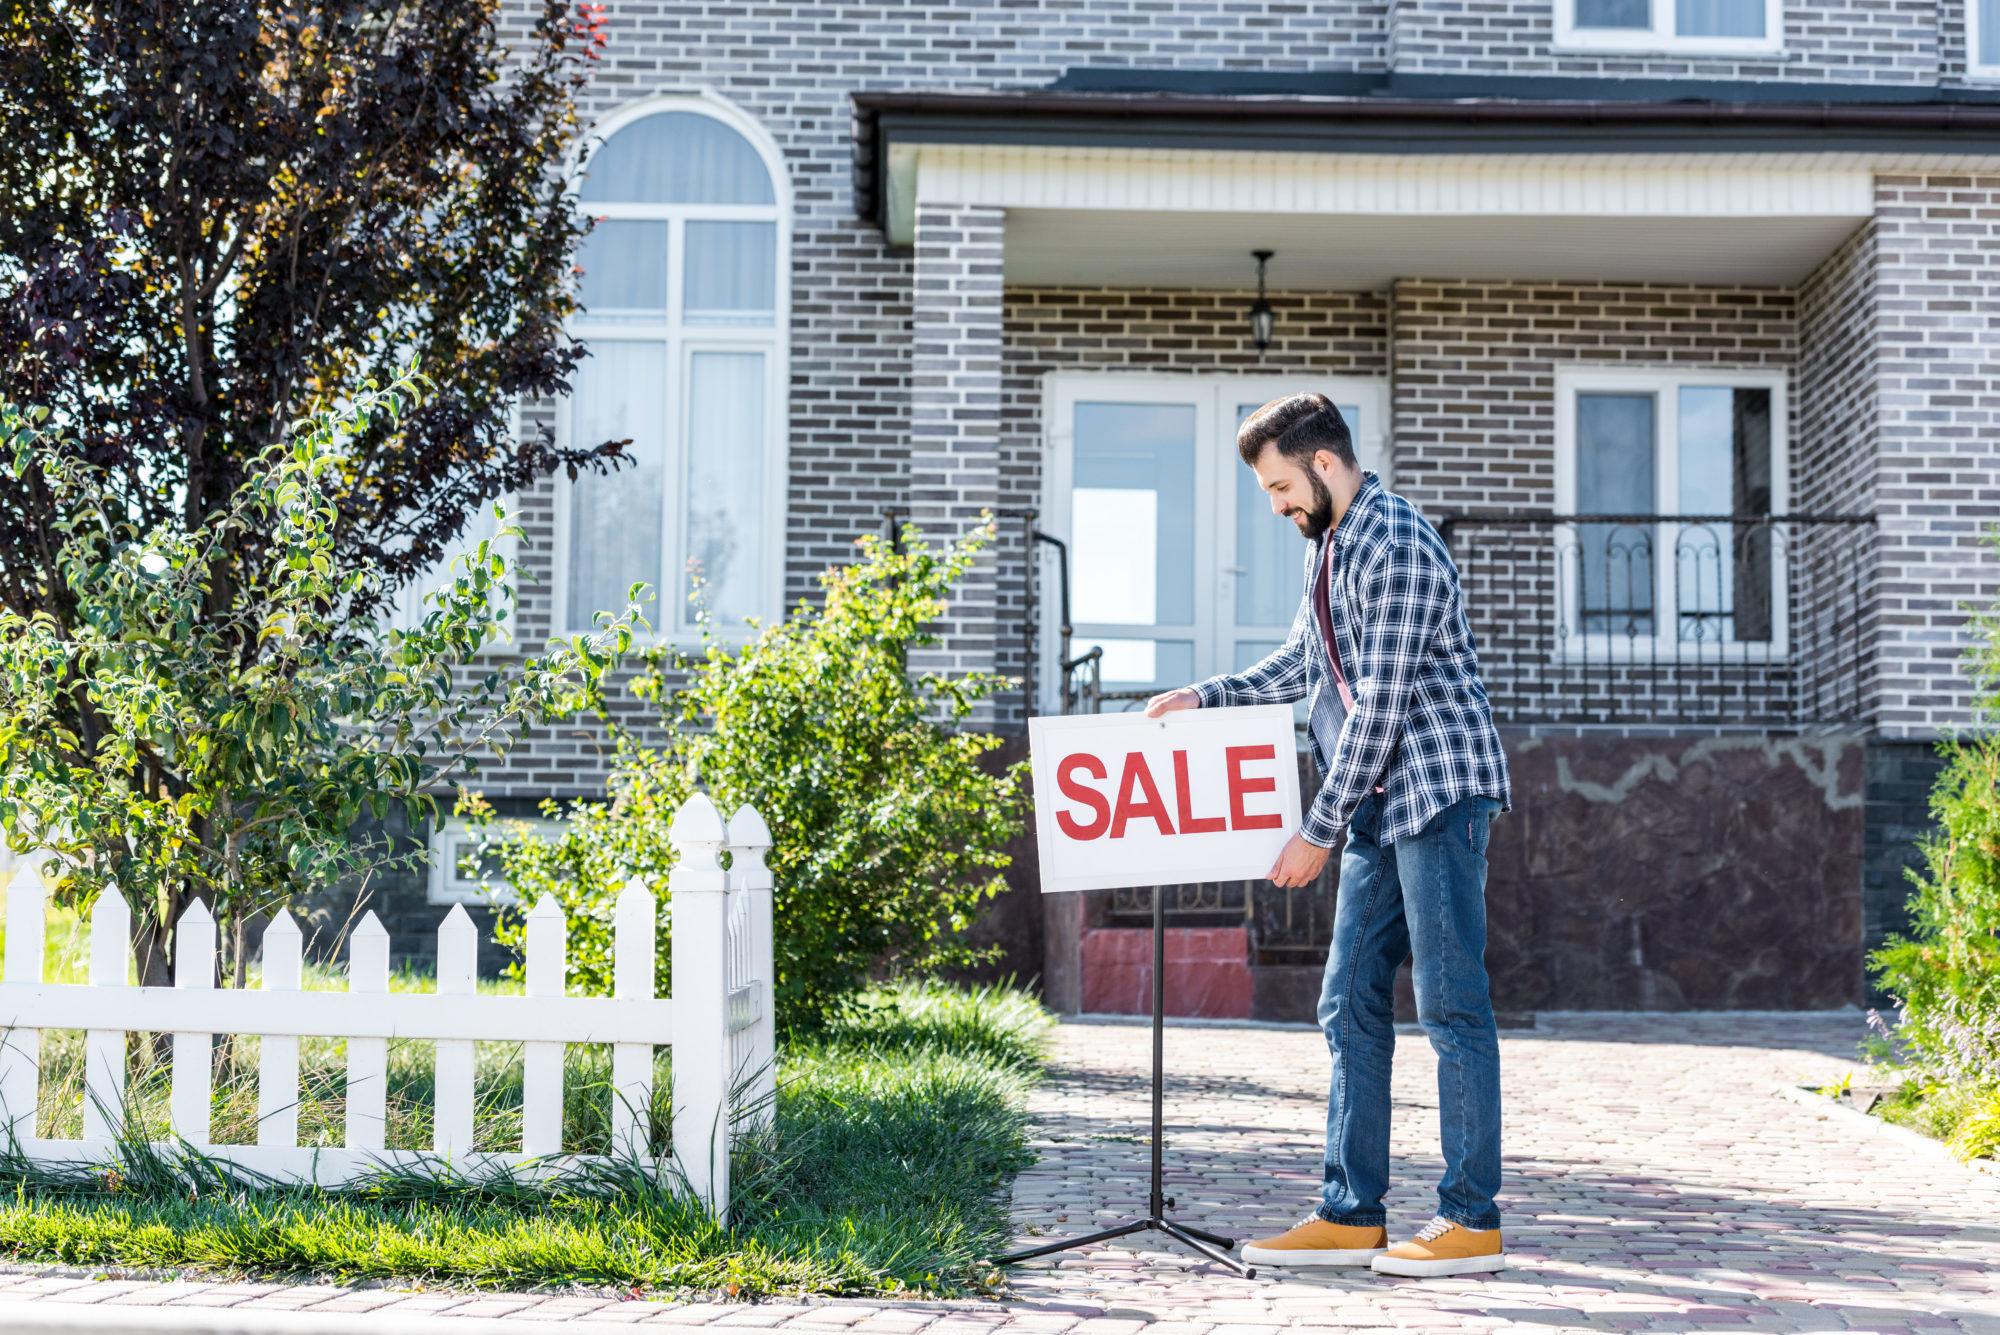 Selling Your Home? Consider These Tax Implications